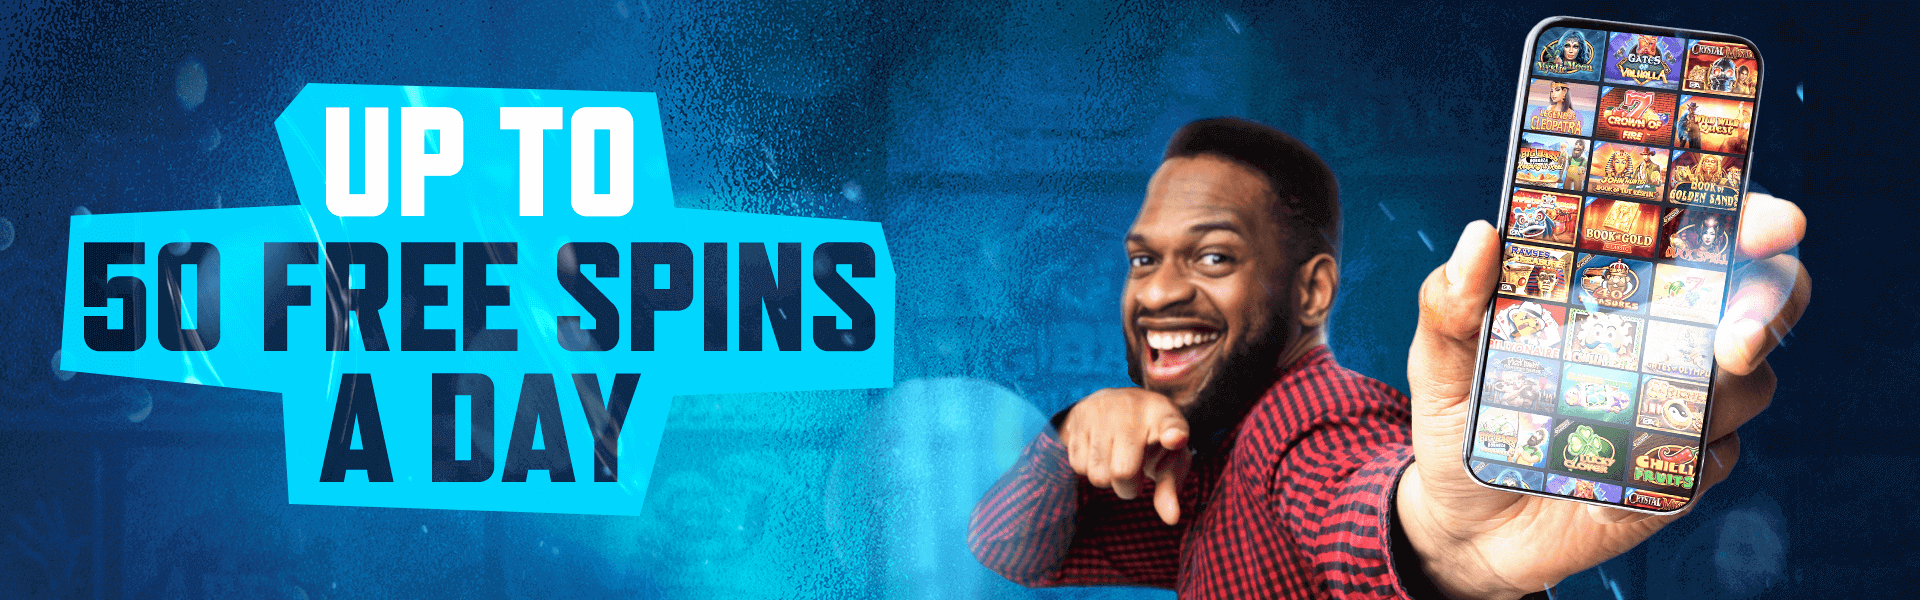 10 free spins every day